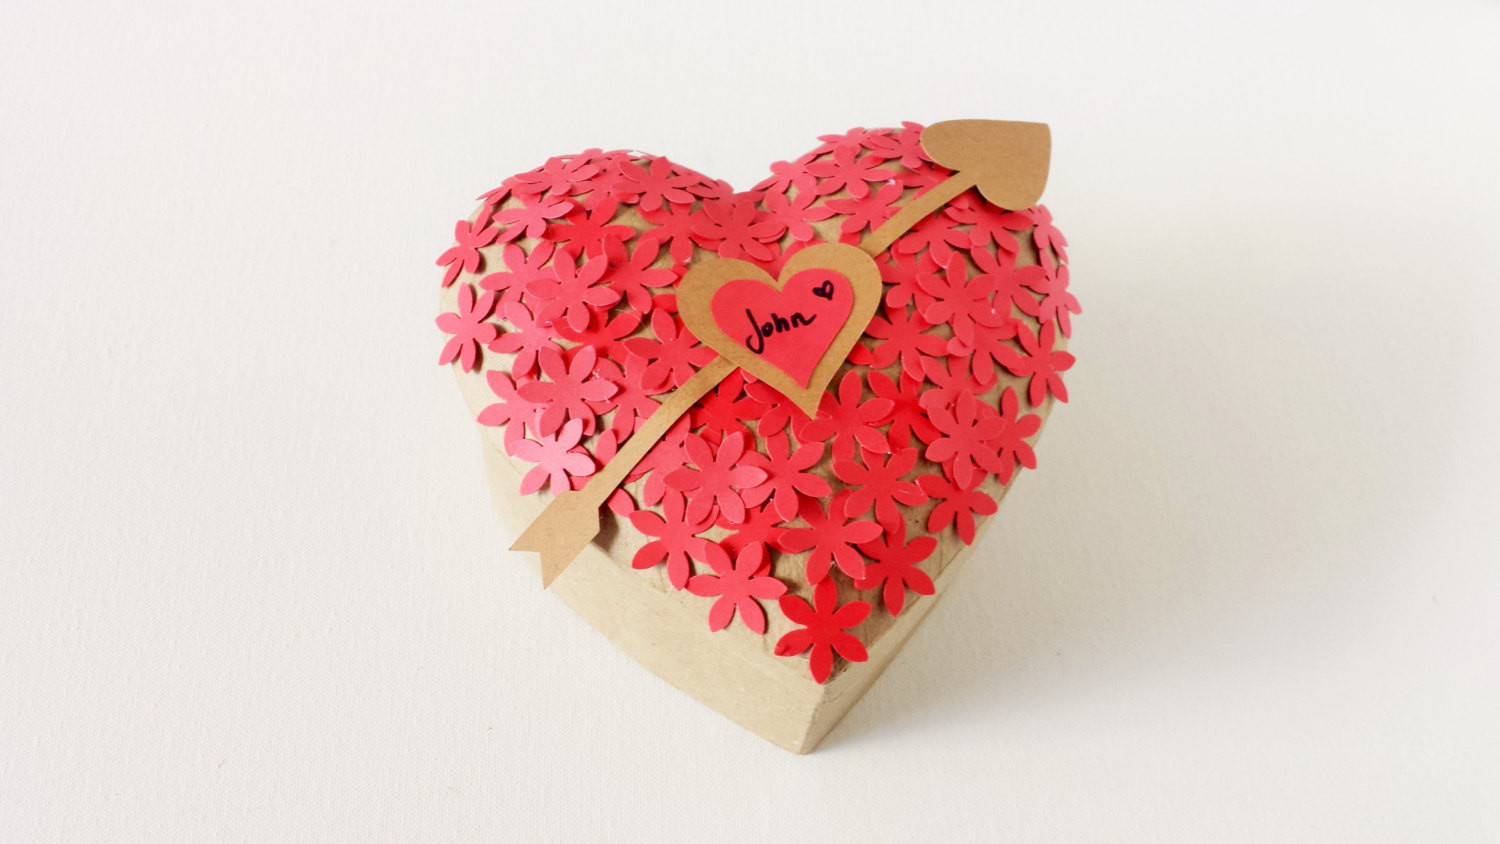 Valentine Gift Box Ideas
 18 Cute Little Gift Box Ideas for Valentine s Day Style